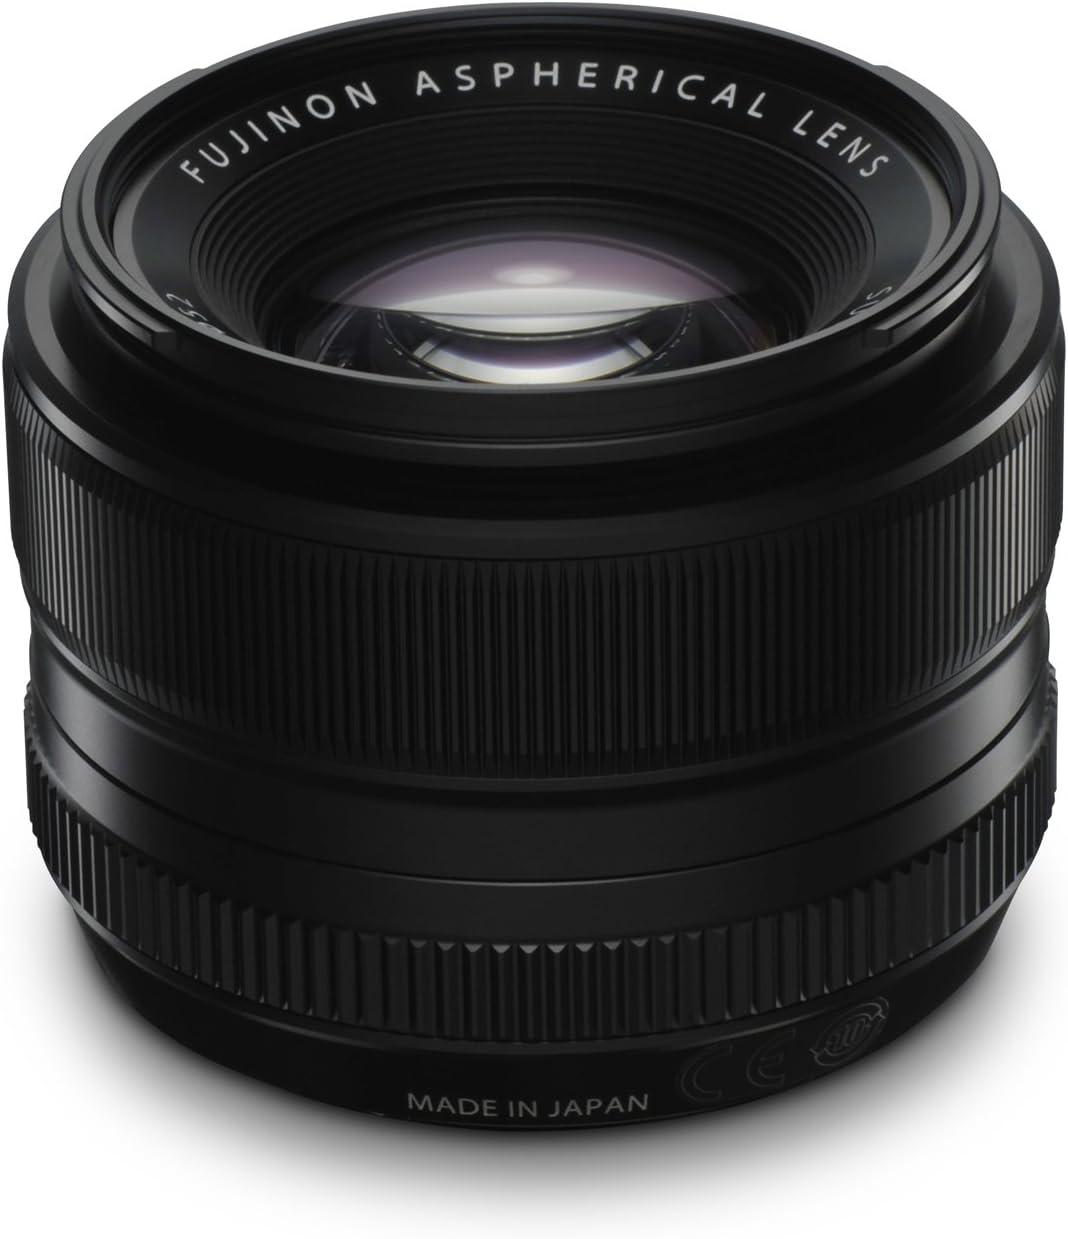 Fujifilm XF35 mm F1.4 R Lens - perfect lens for travel photography